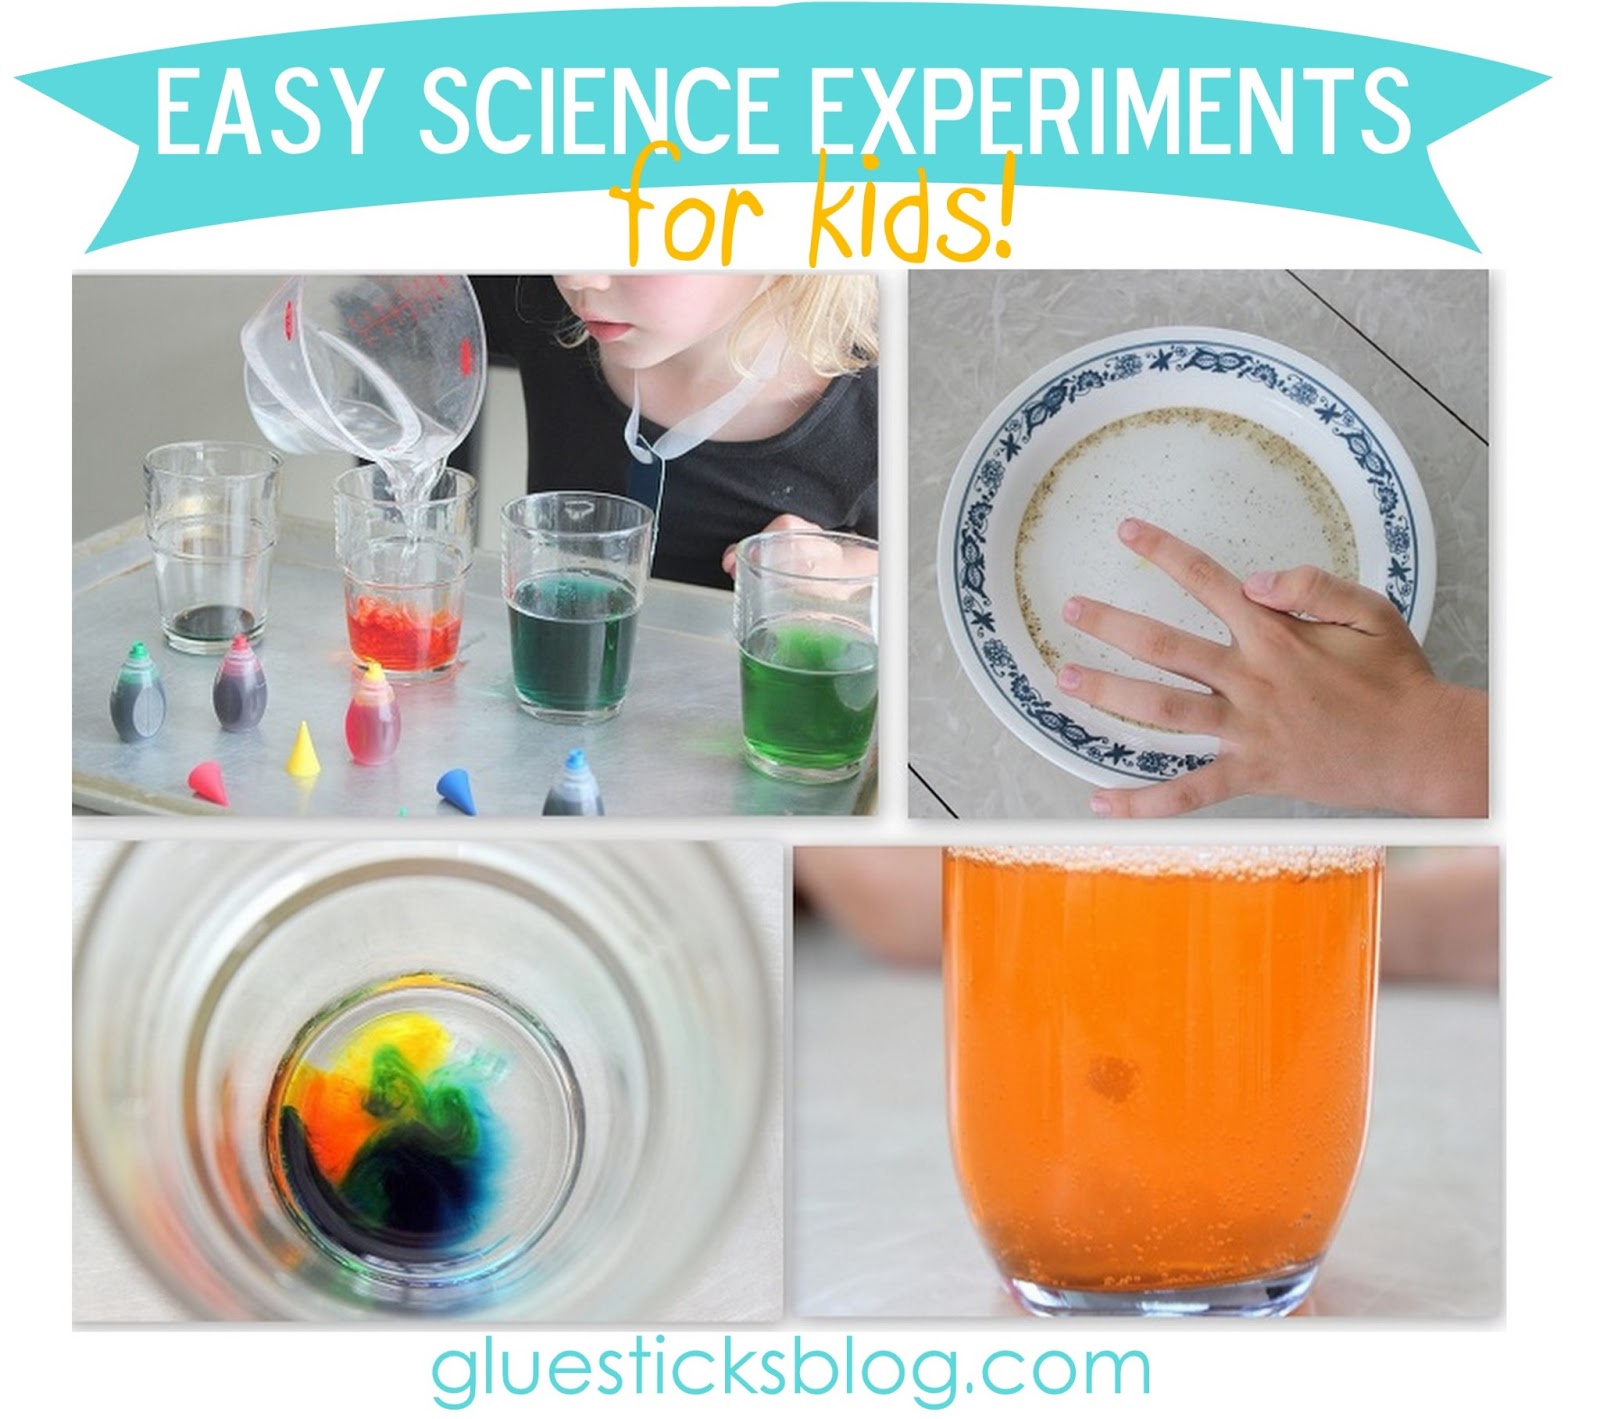 Easy Science Experiments for Kids | Gluesticks